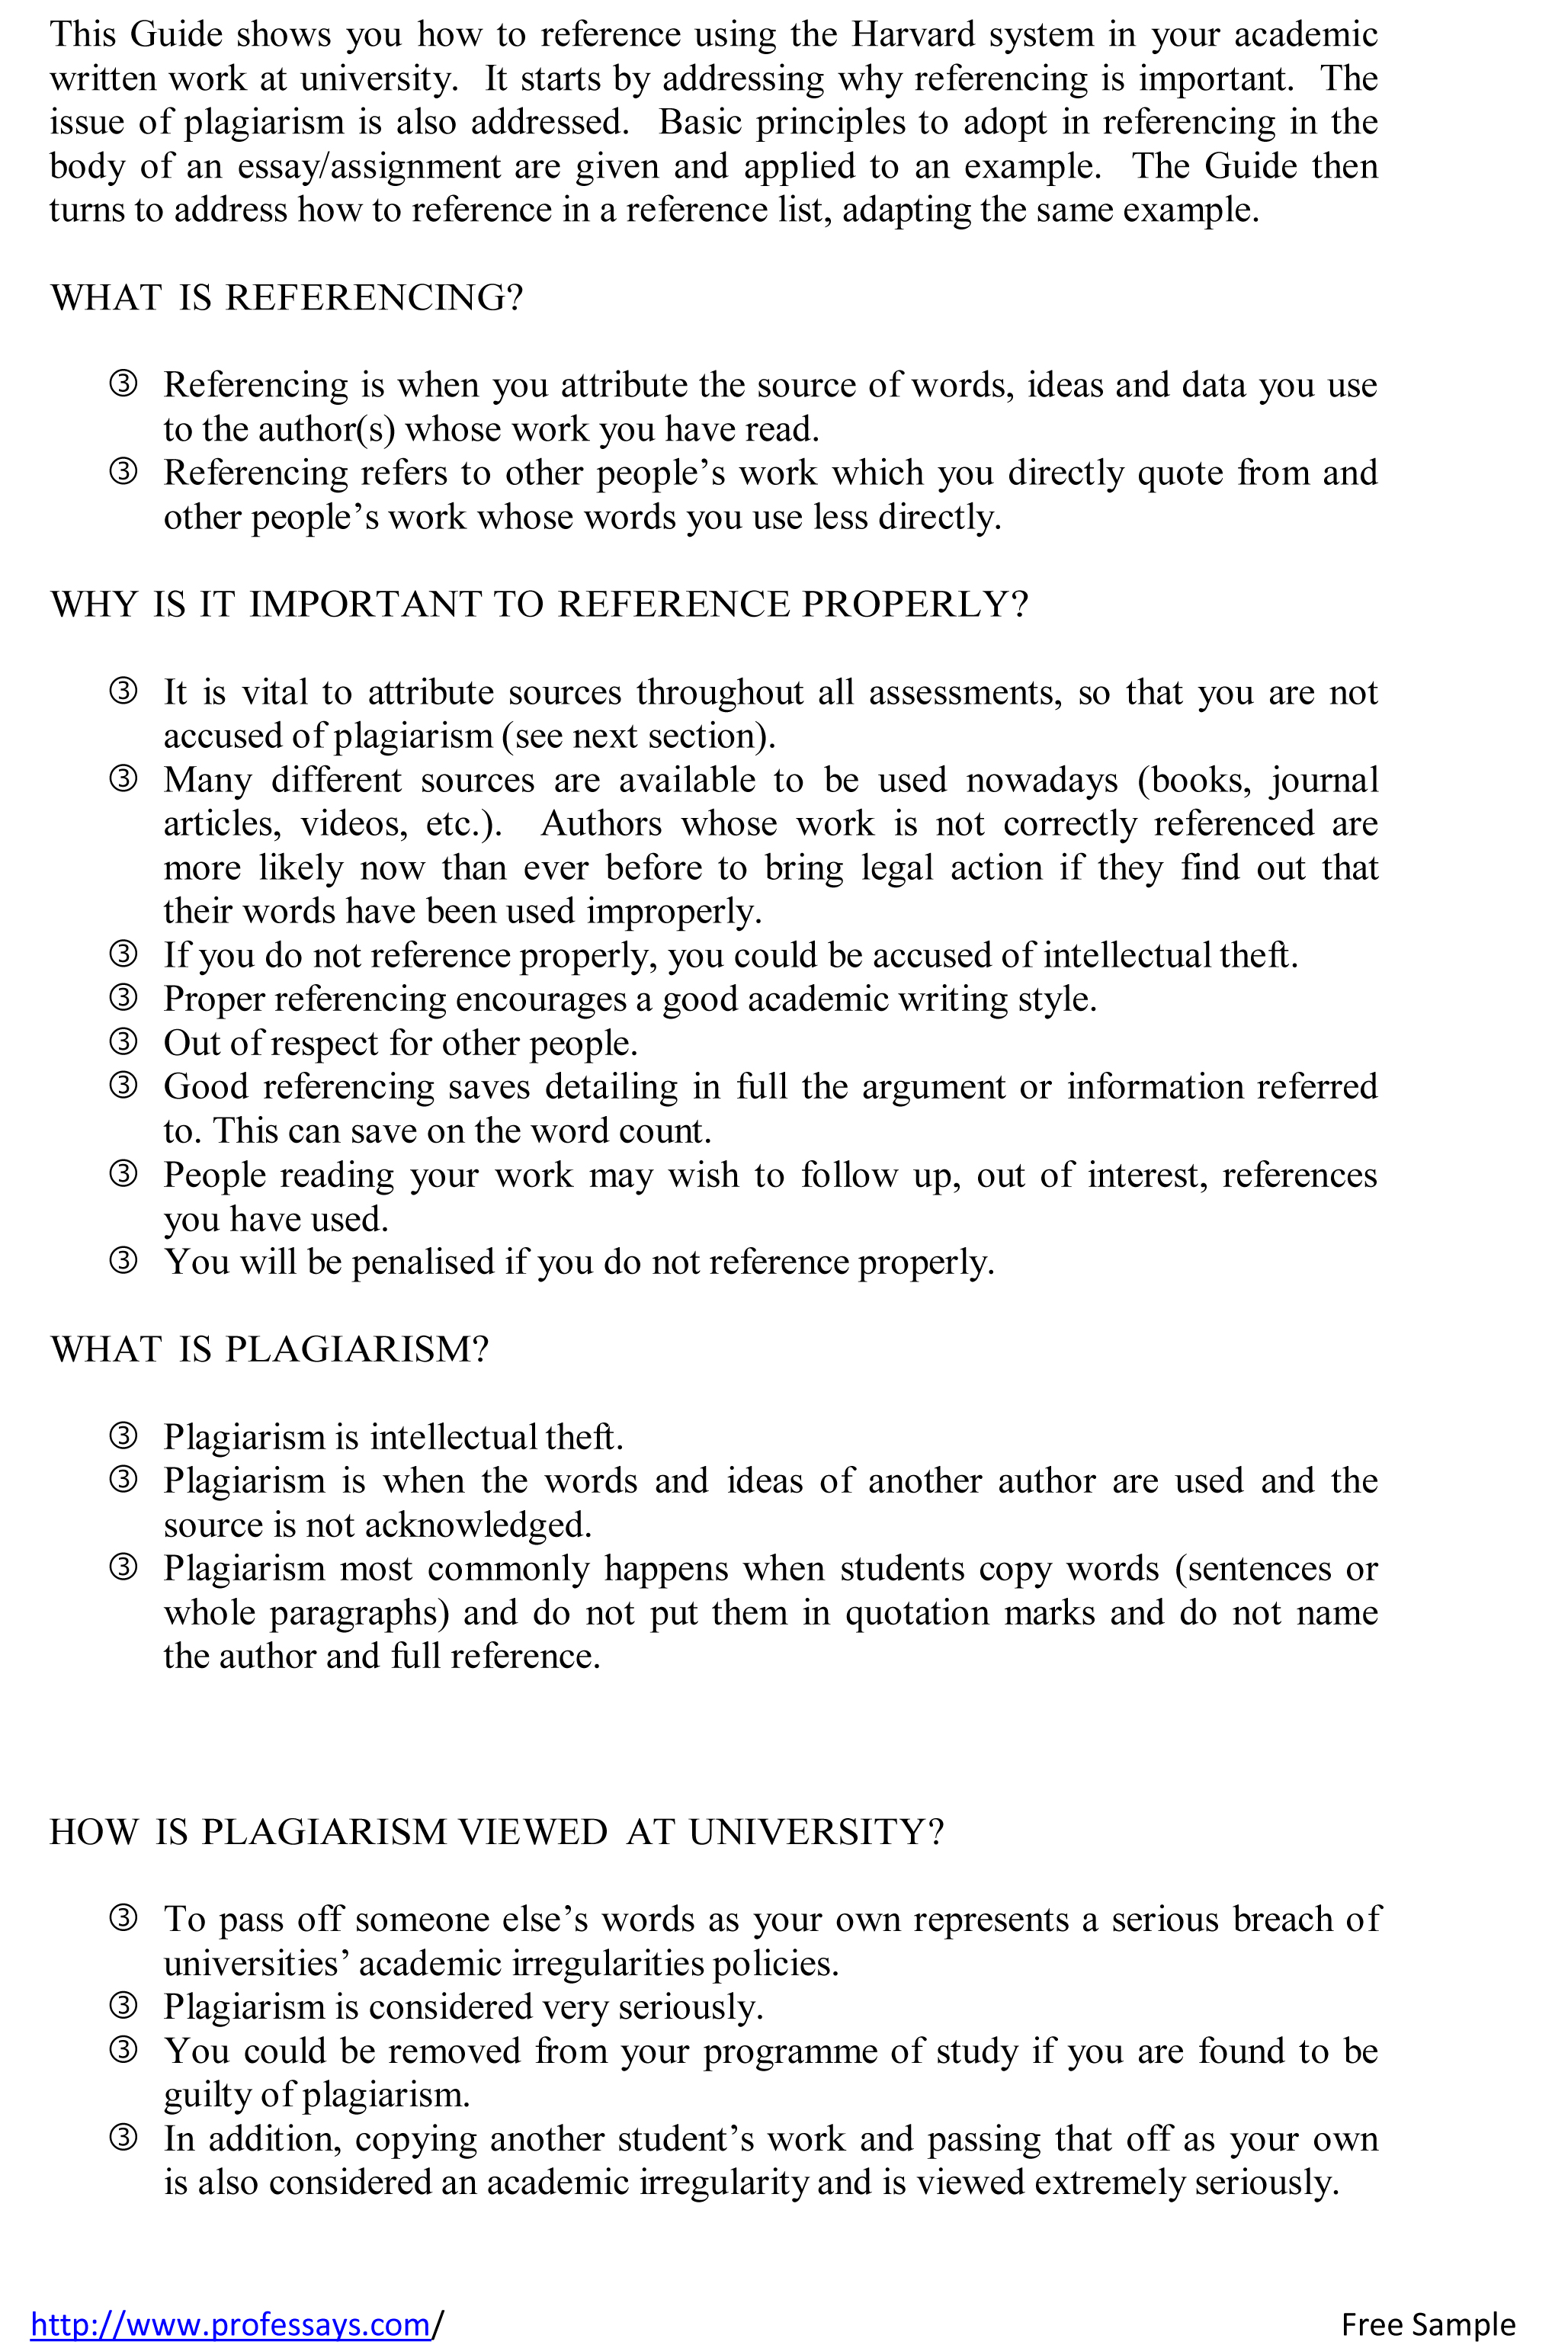 Harvard Referencing - essay writing help from blogger.com